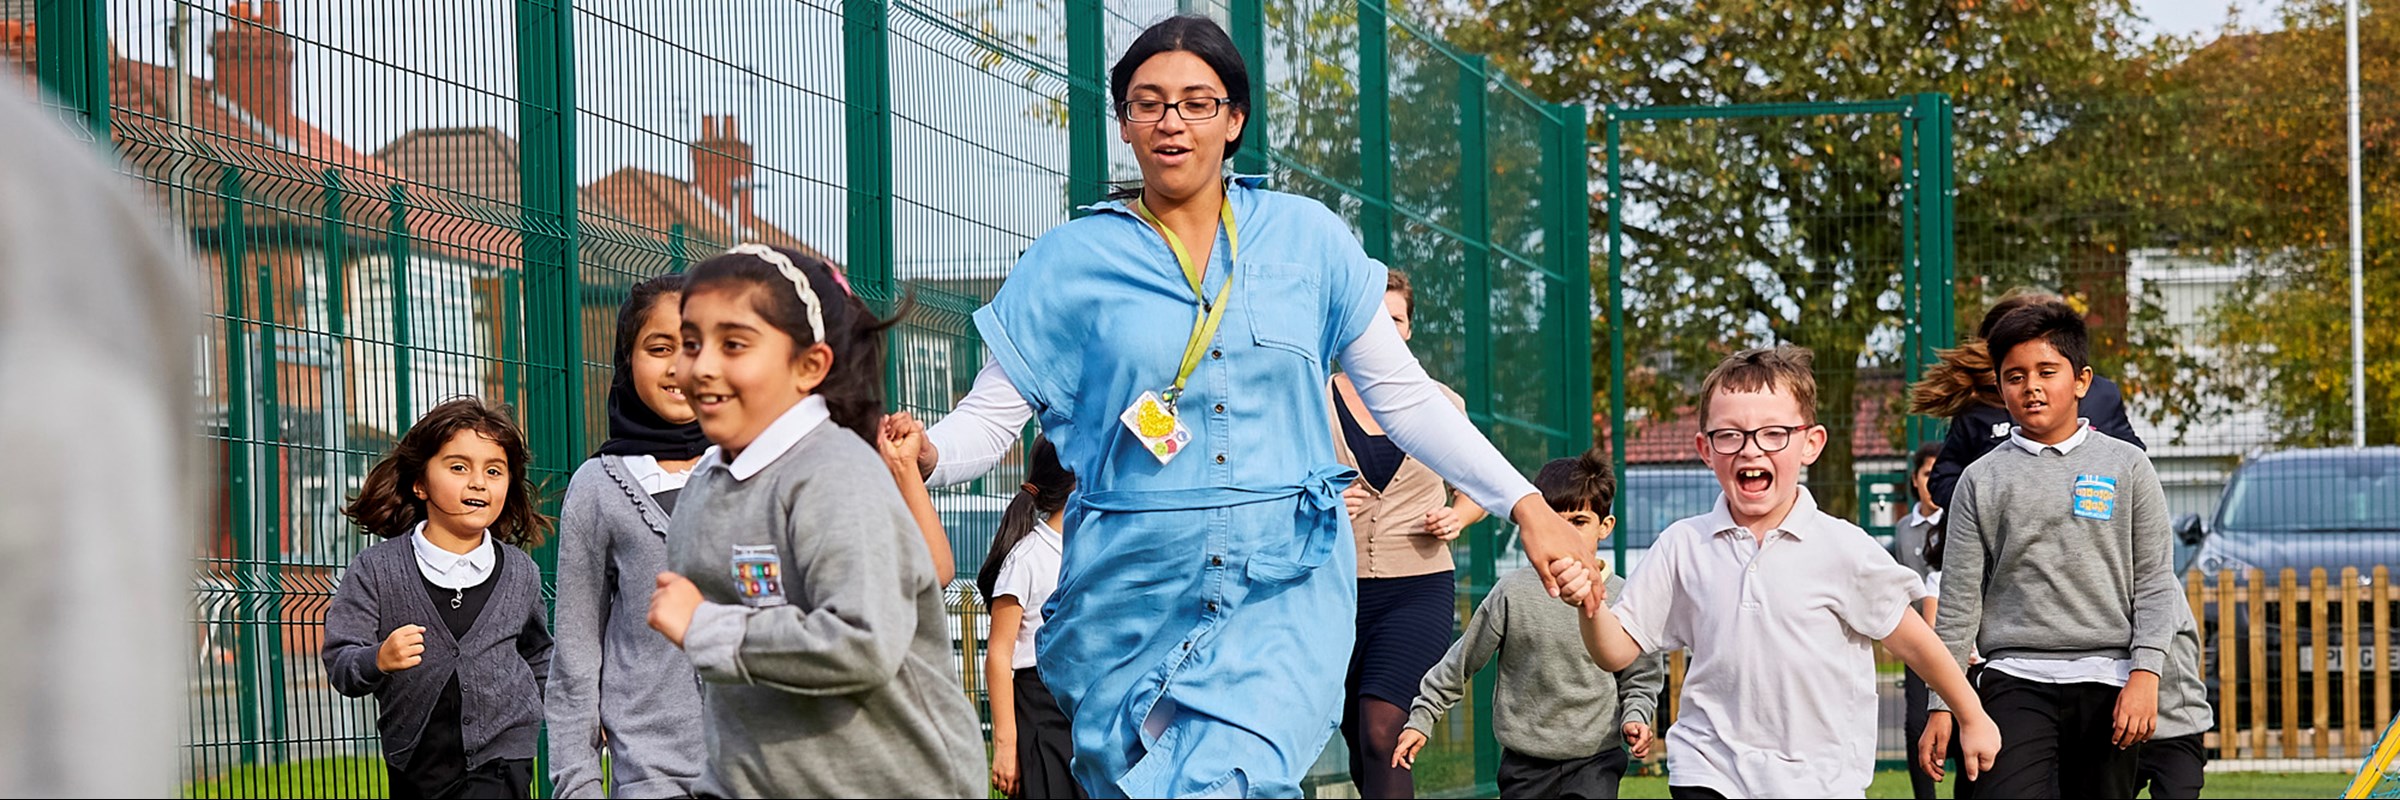 Children and adult running in a grassed school environment. Both the adult and children are smiling as they run.